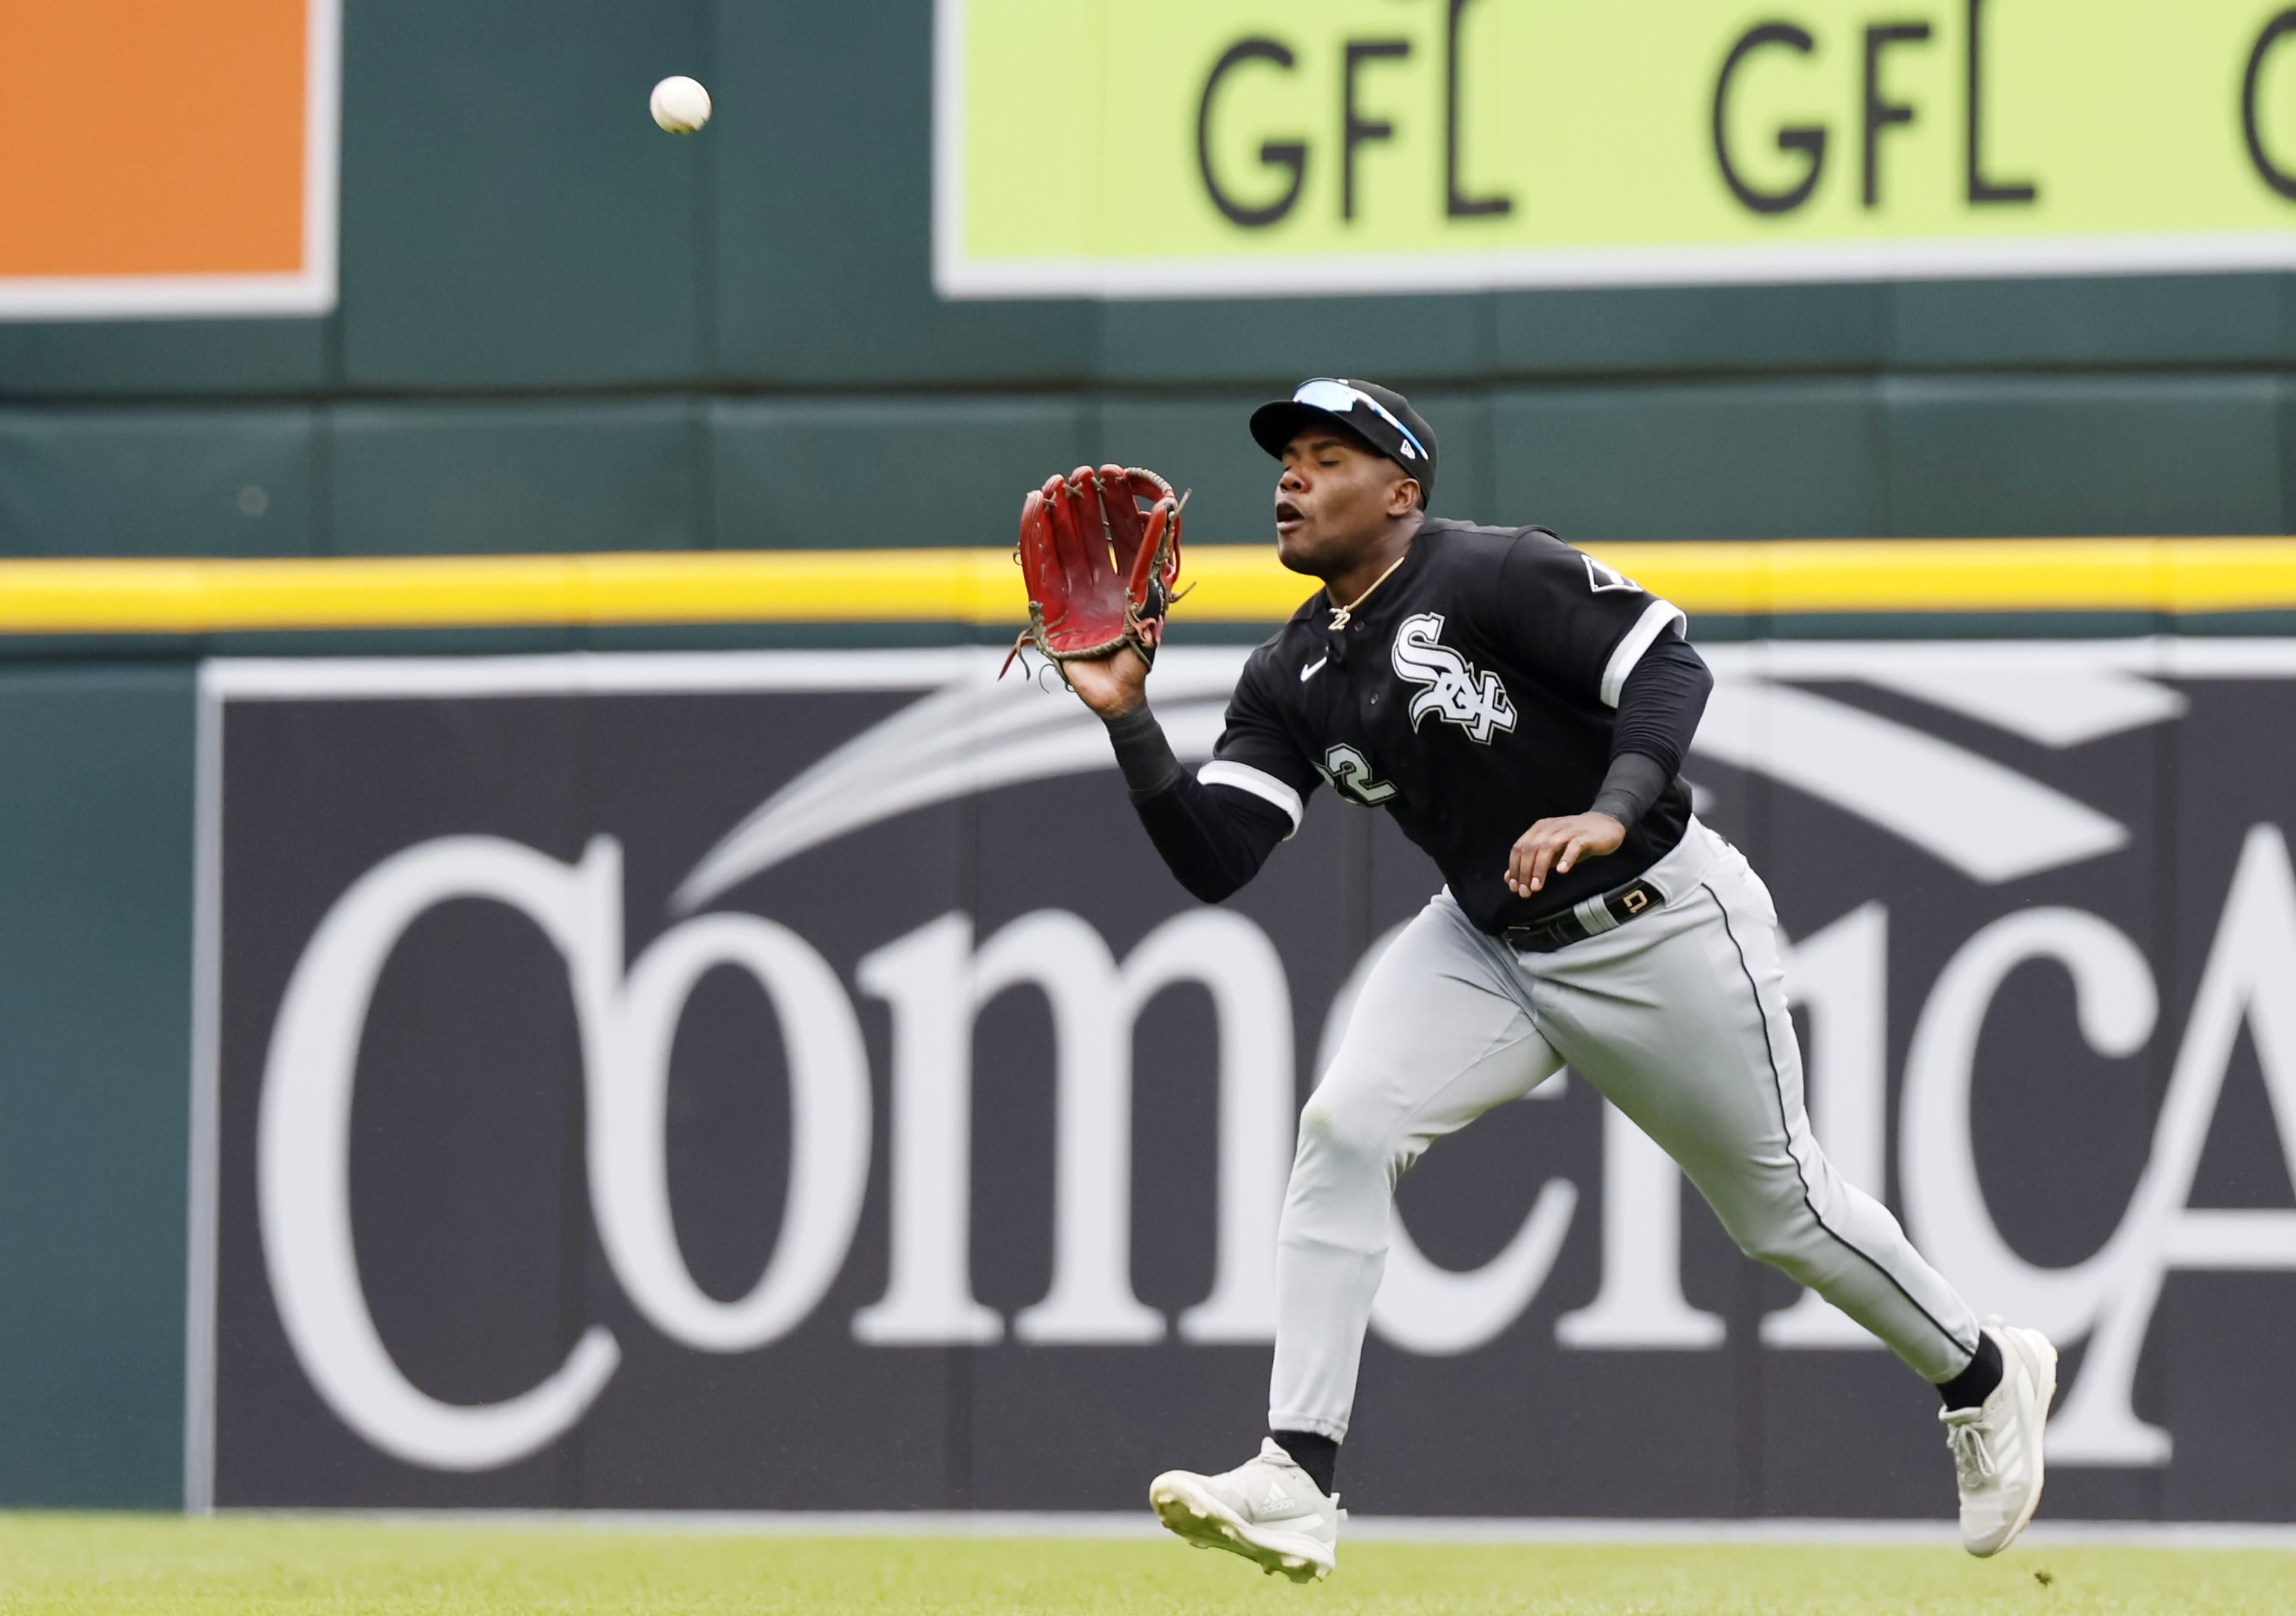 Sox outfielder Oscar Colas has to take advantage of his opportunity